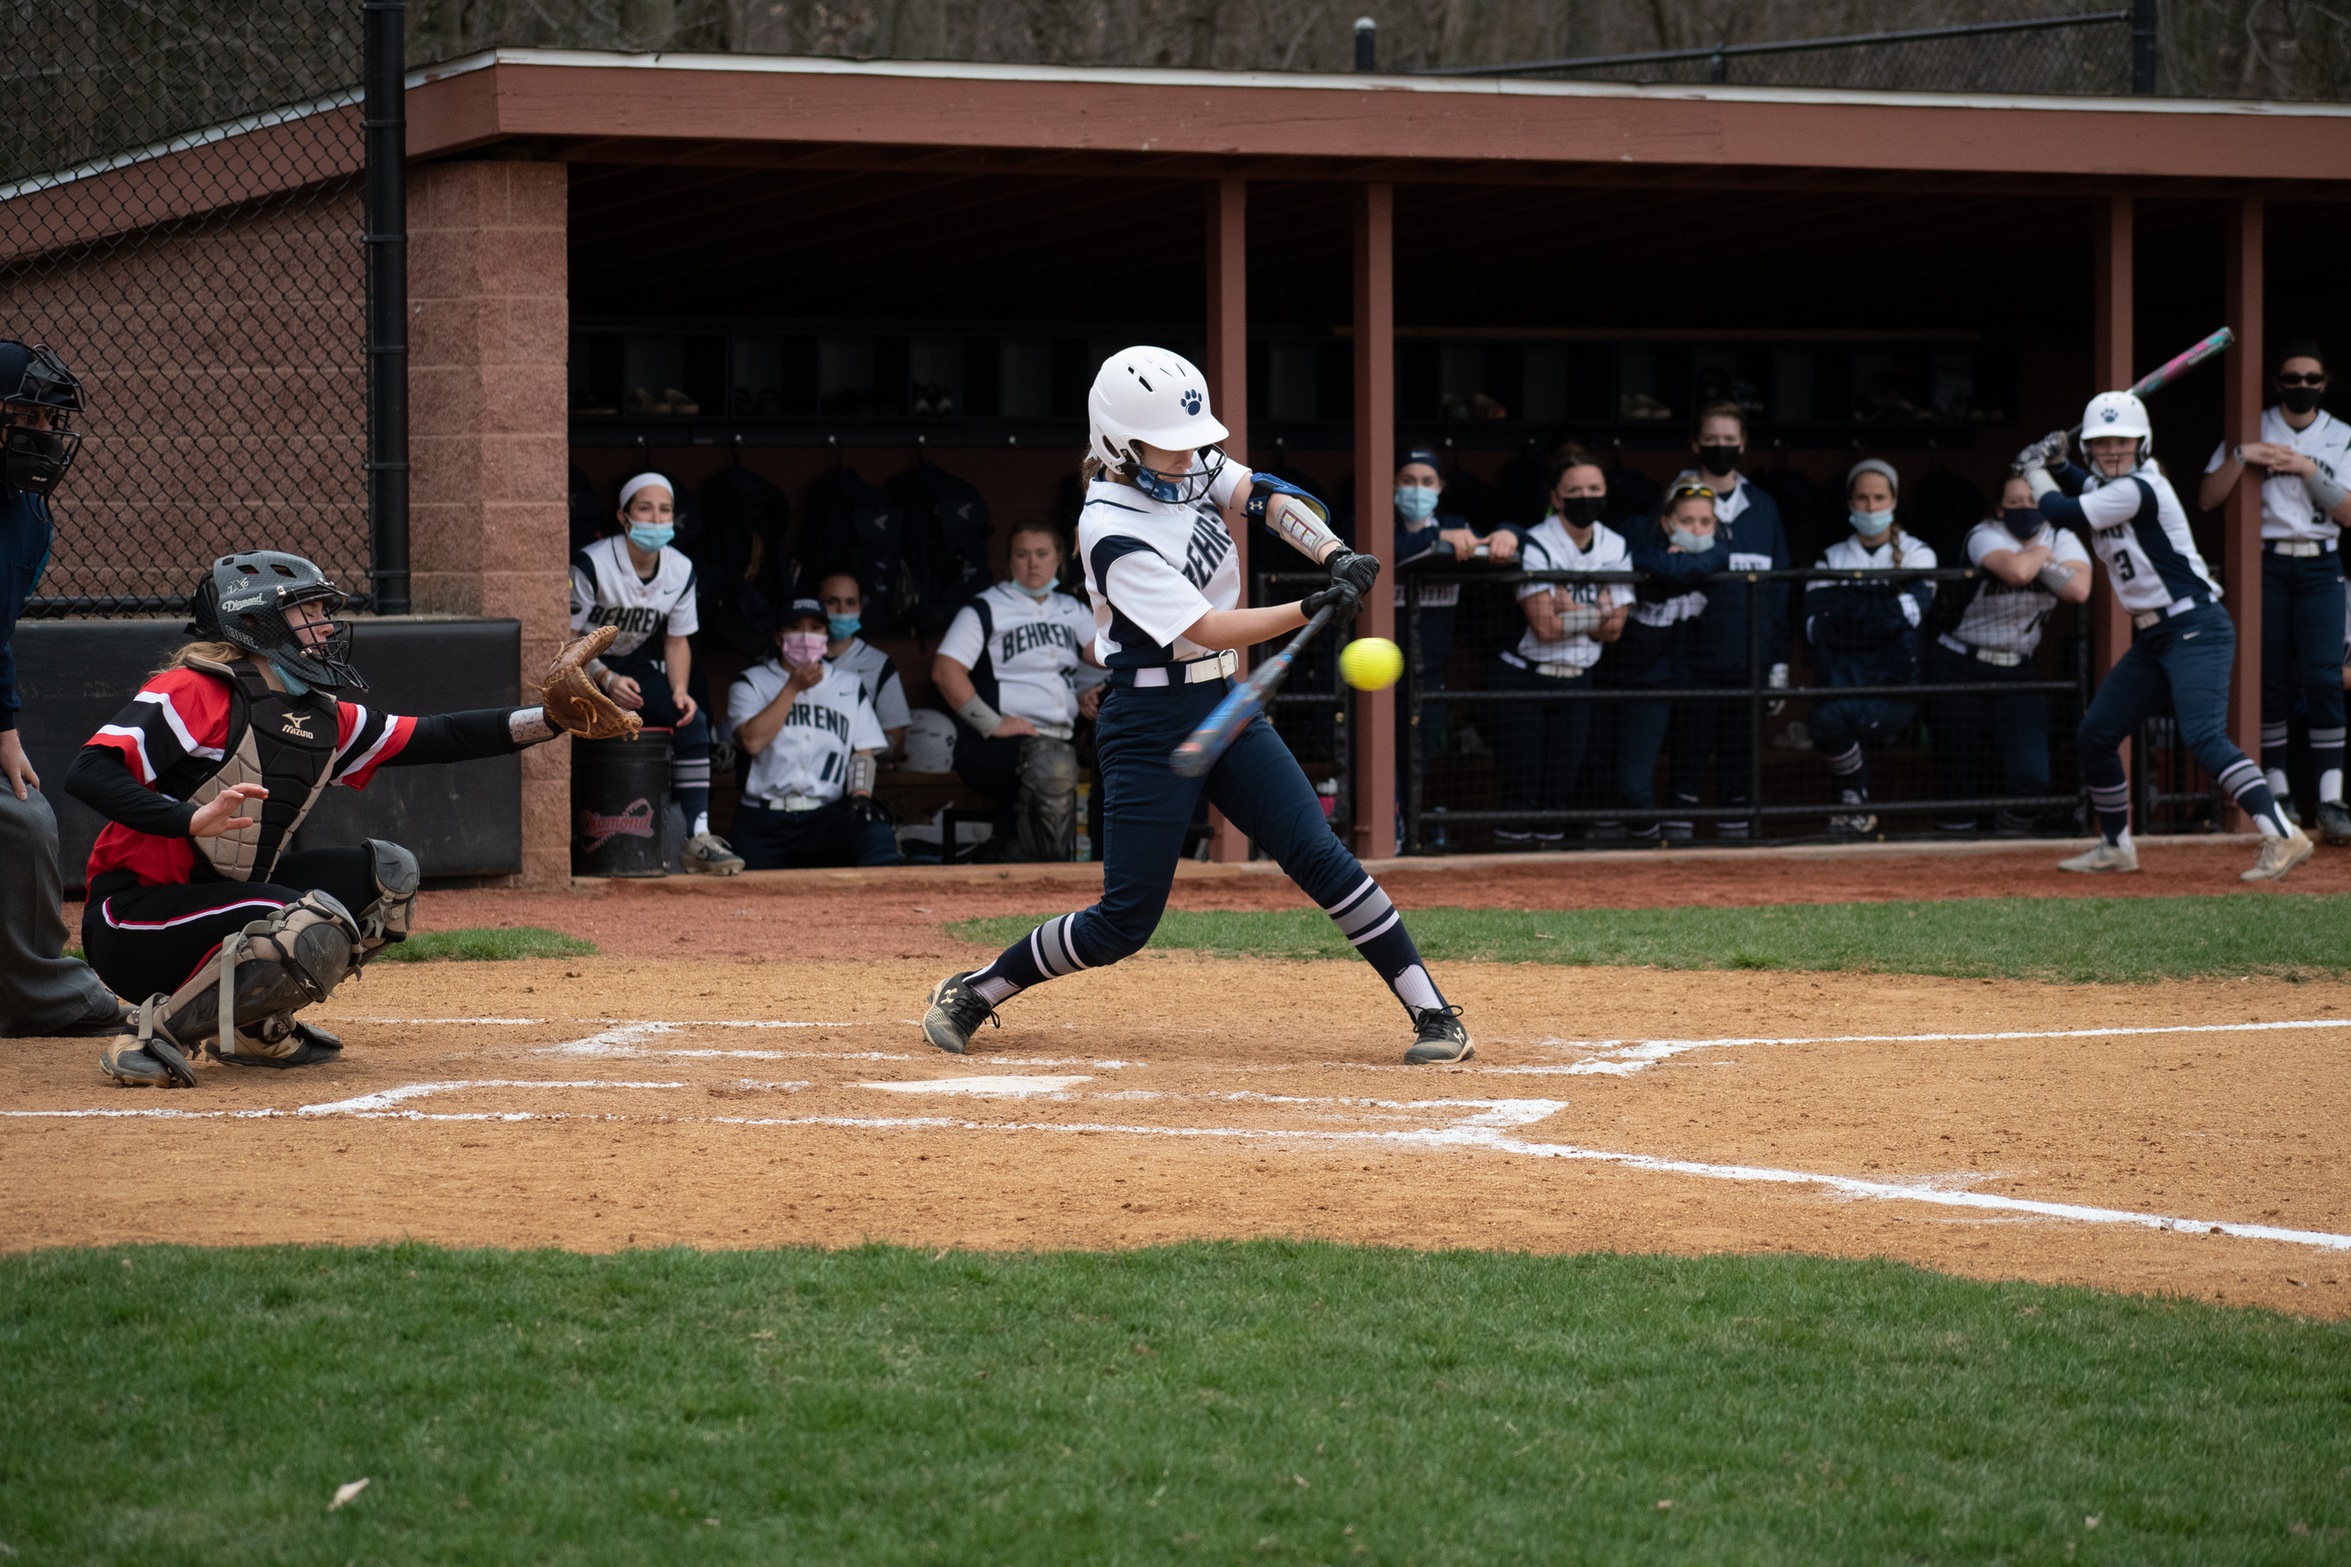 Lions Split With Altoona in AMCC Games of the Week